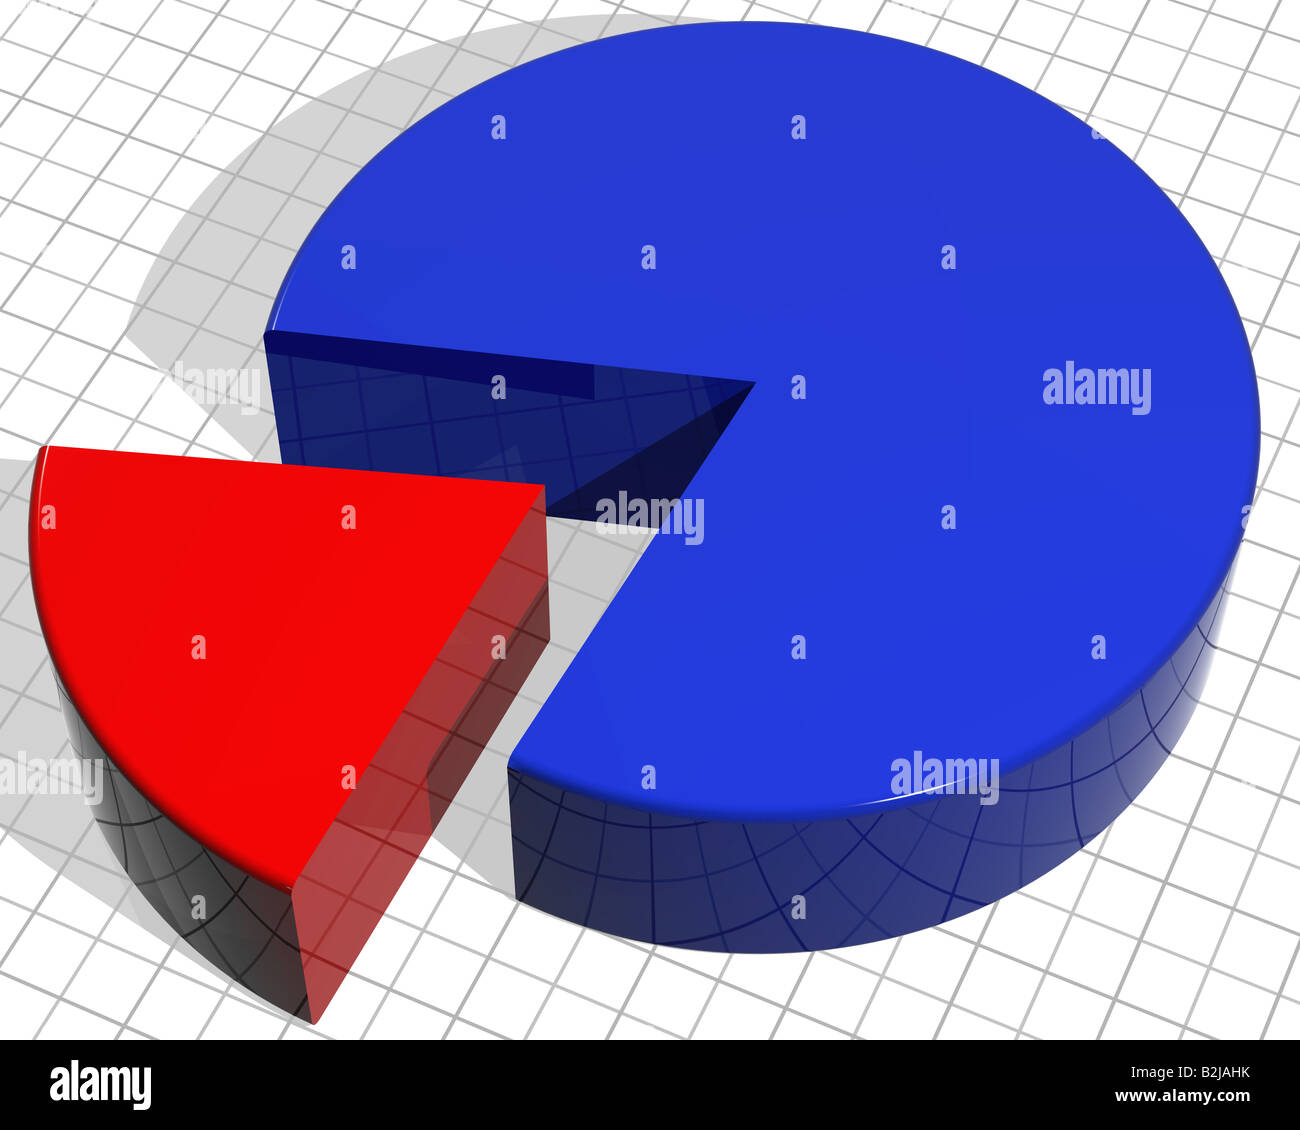 Illustration of a pie chart with a segment sticking out Stock Photo